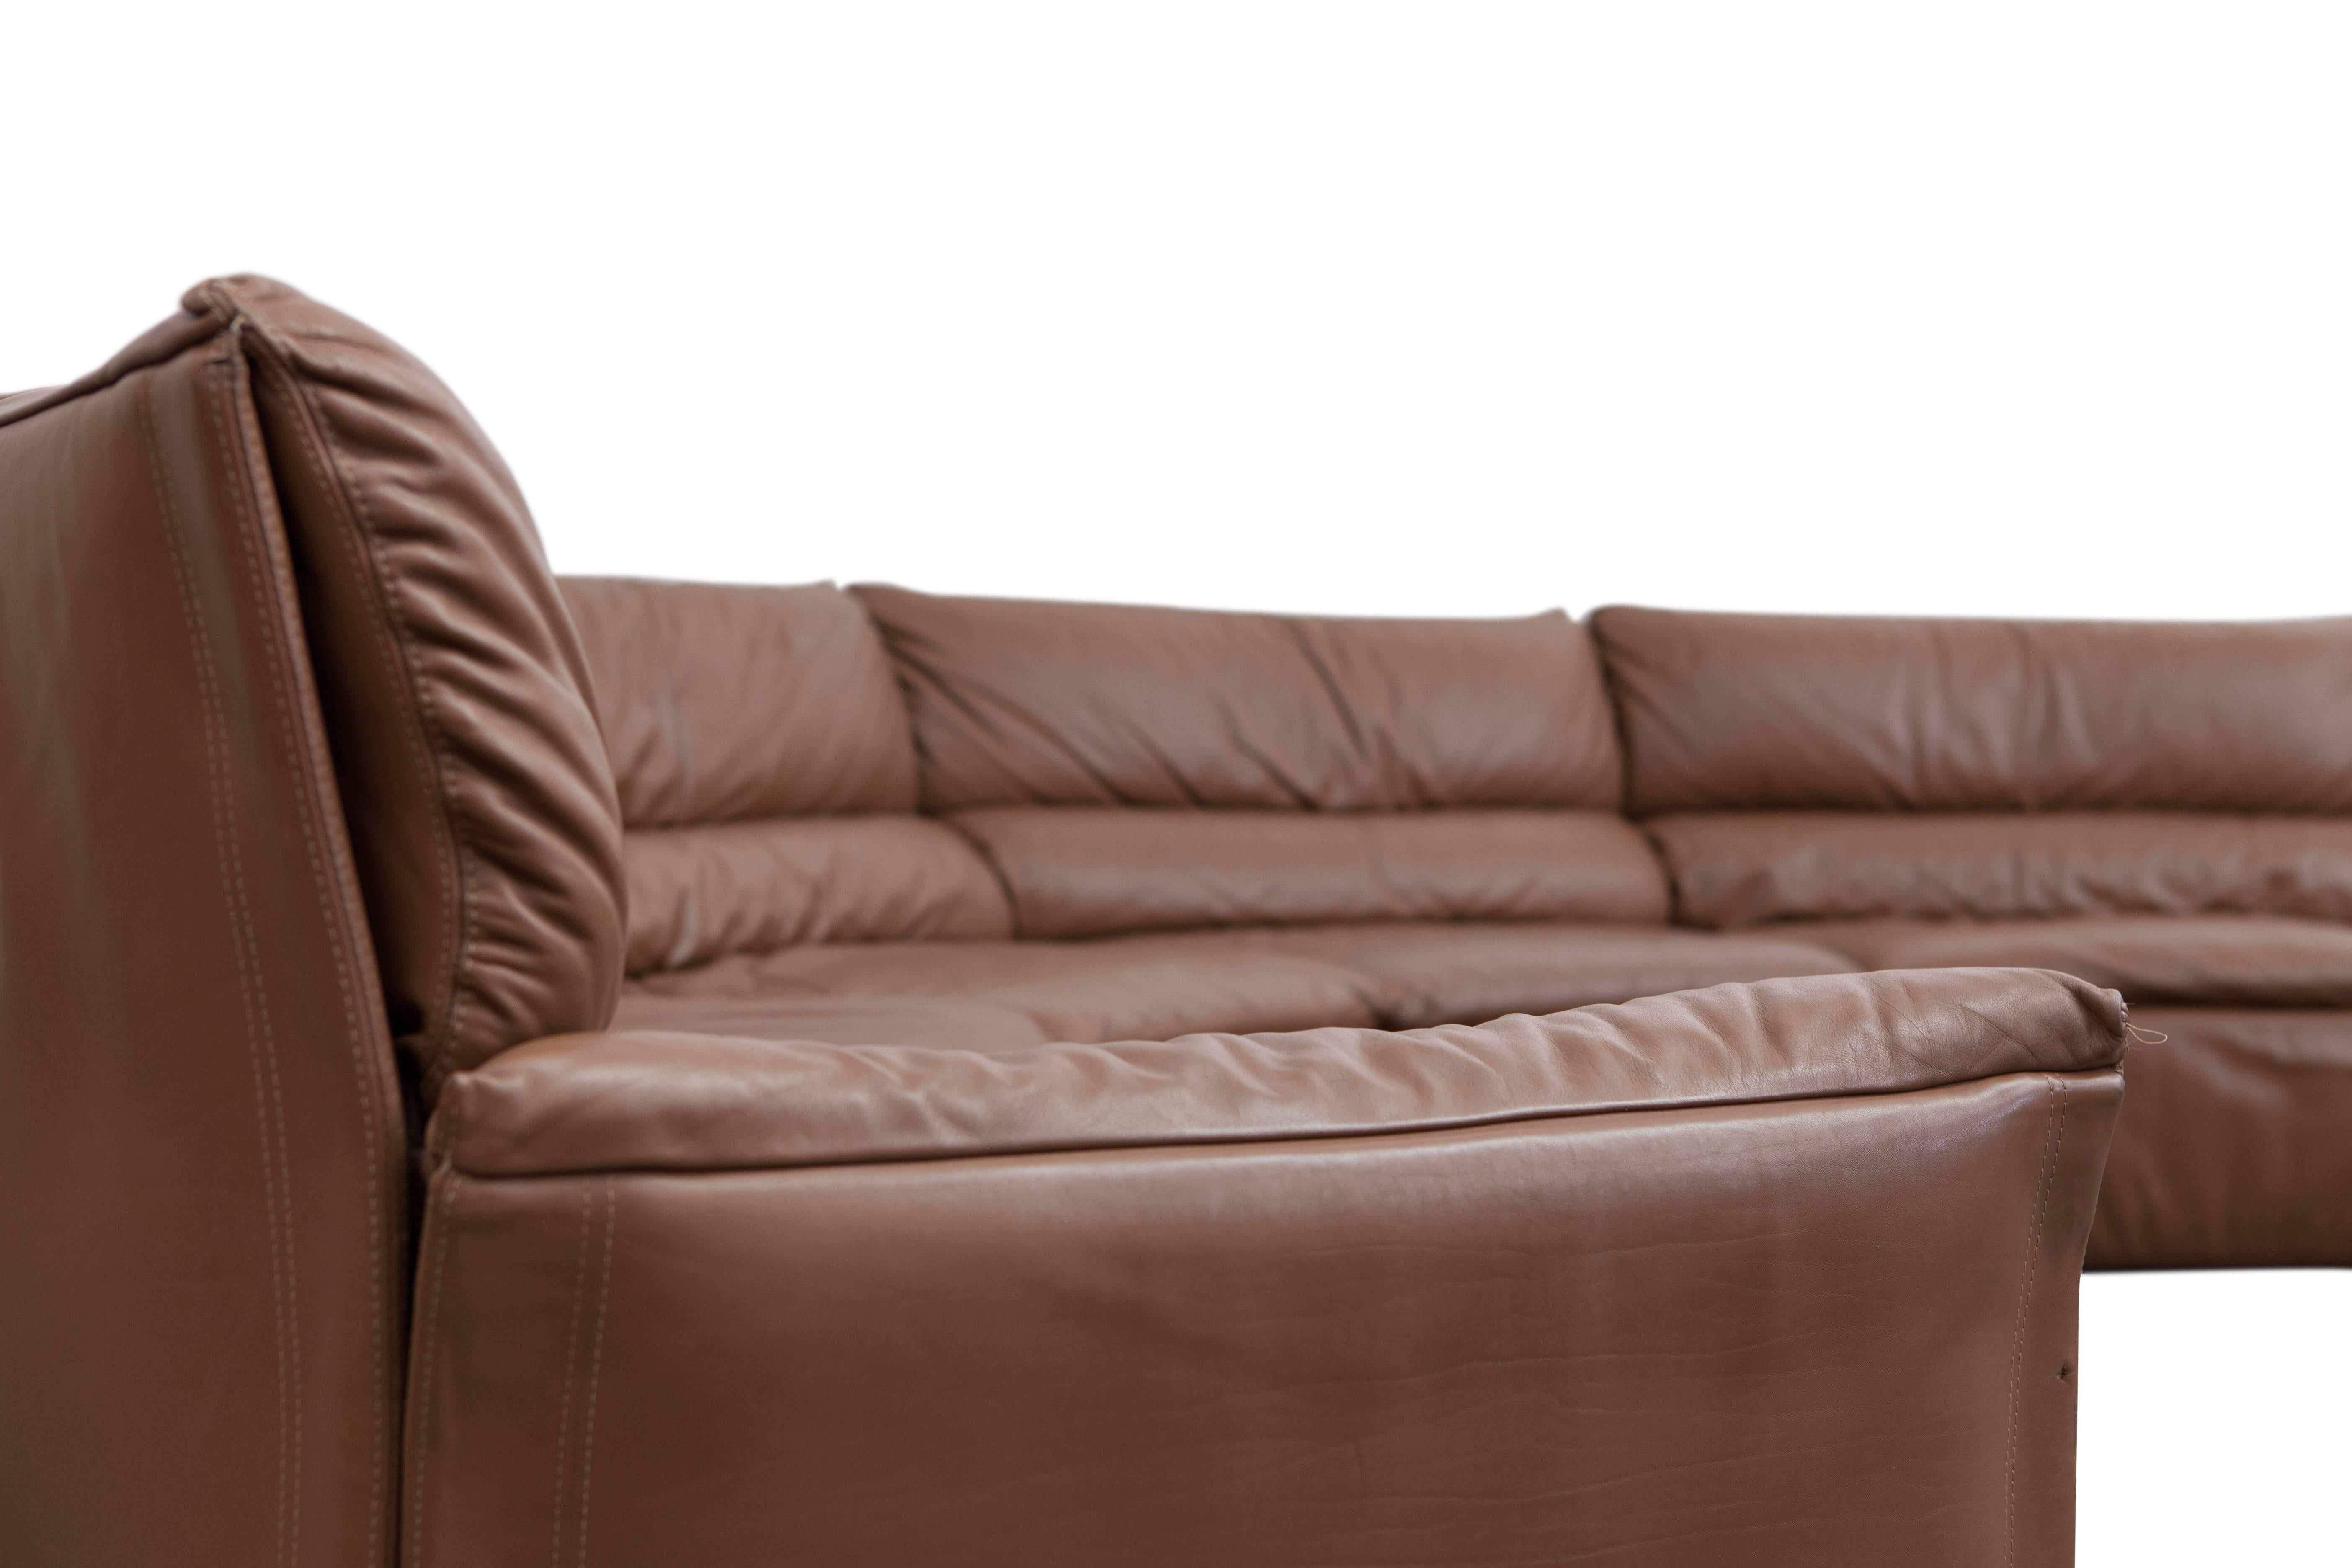 Post-modern Exceptionally large curved sectional sofa in brown leather by Saporiti.
The sofa can be separated and arranged in many different ways, depending on your liking.
The double padded backrest provides a lot of comfort. Each piece is signed